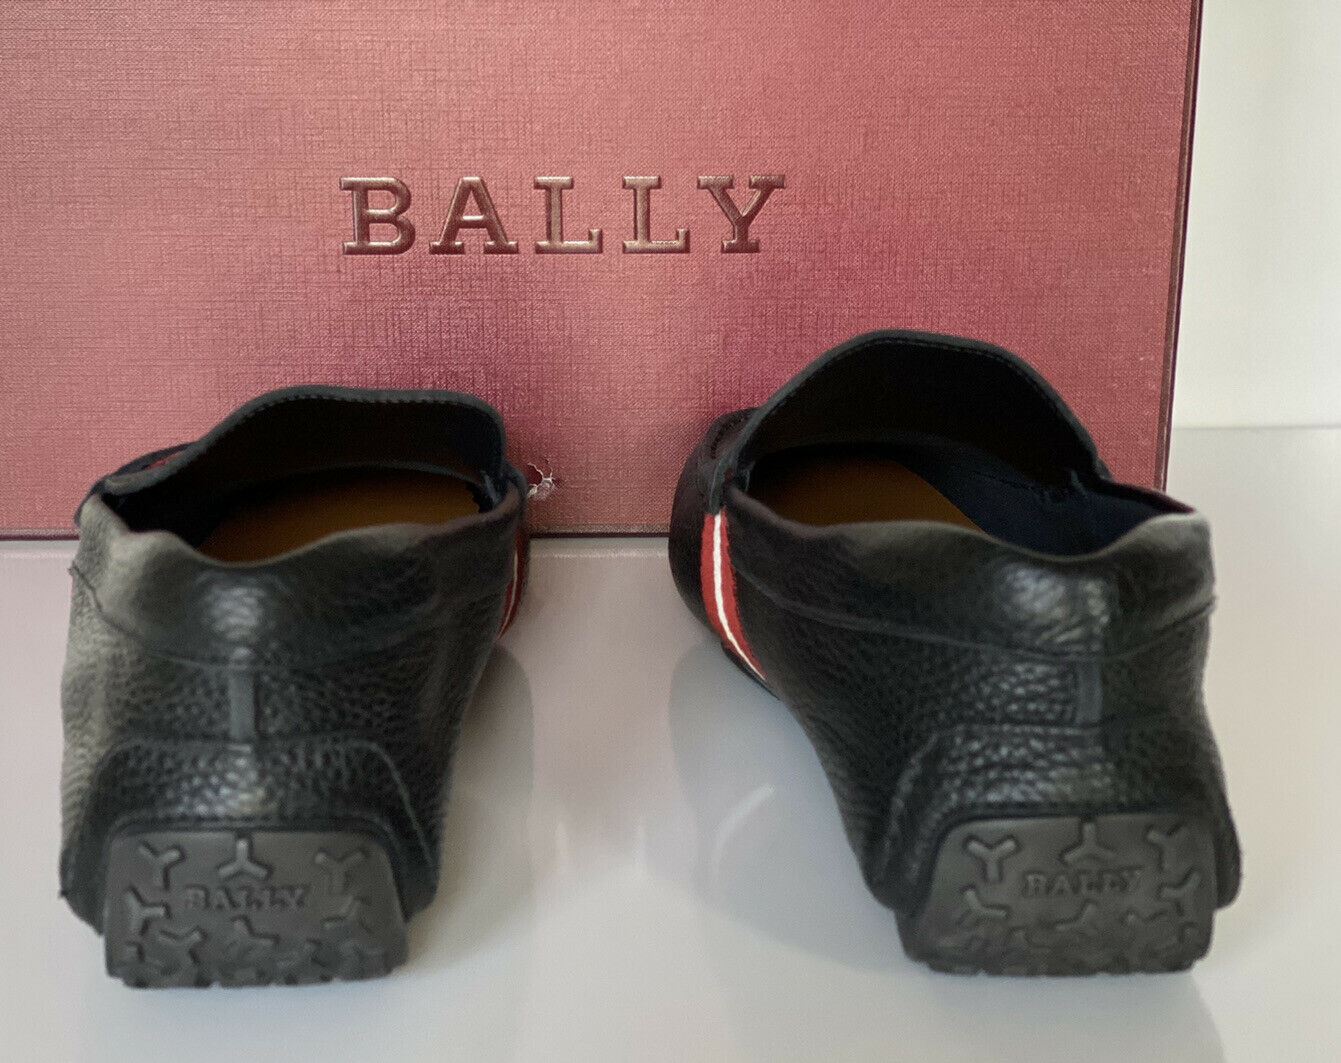 NIB Bally Mens Bovine Grained Leather Driver Shoes Black 8.5 D US 6228298 Italy